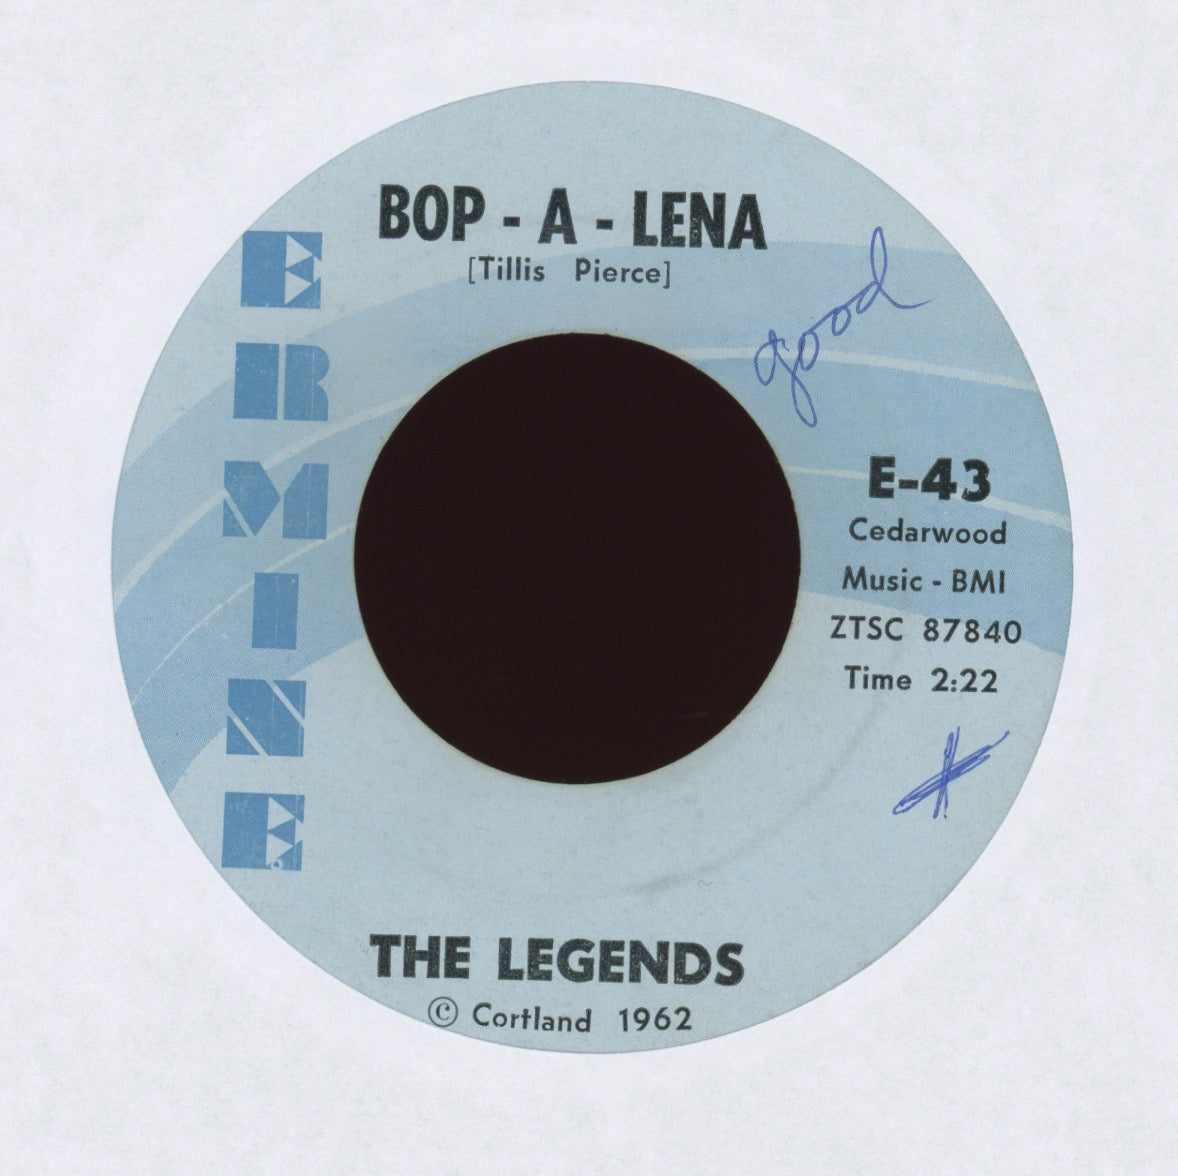 The Legends - Bop-A-Lena on Ermine